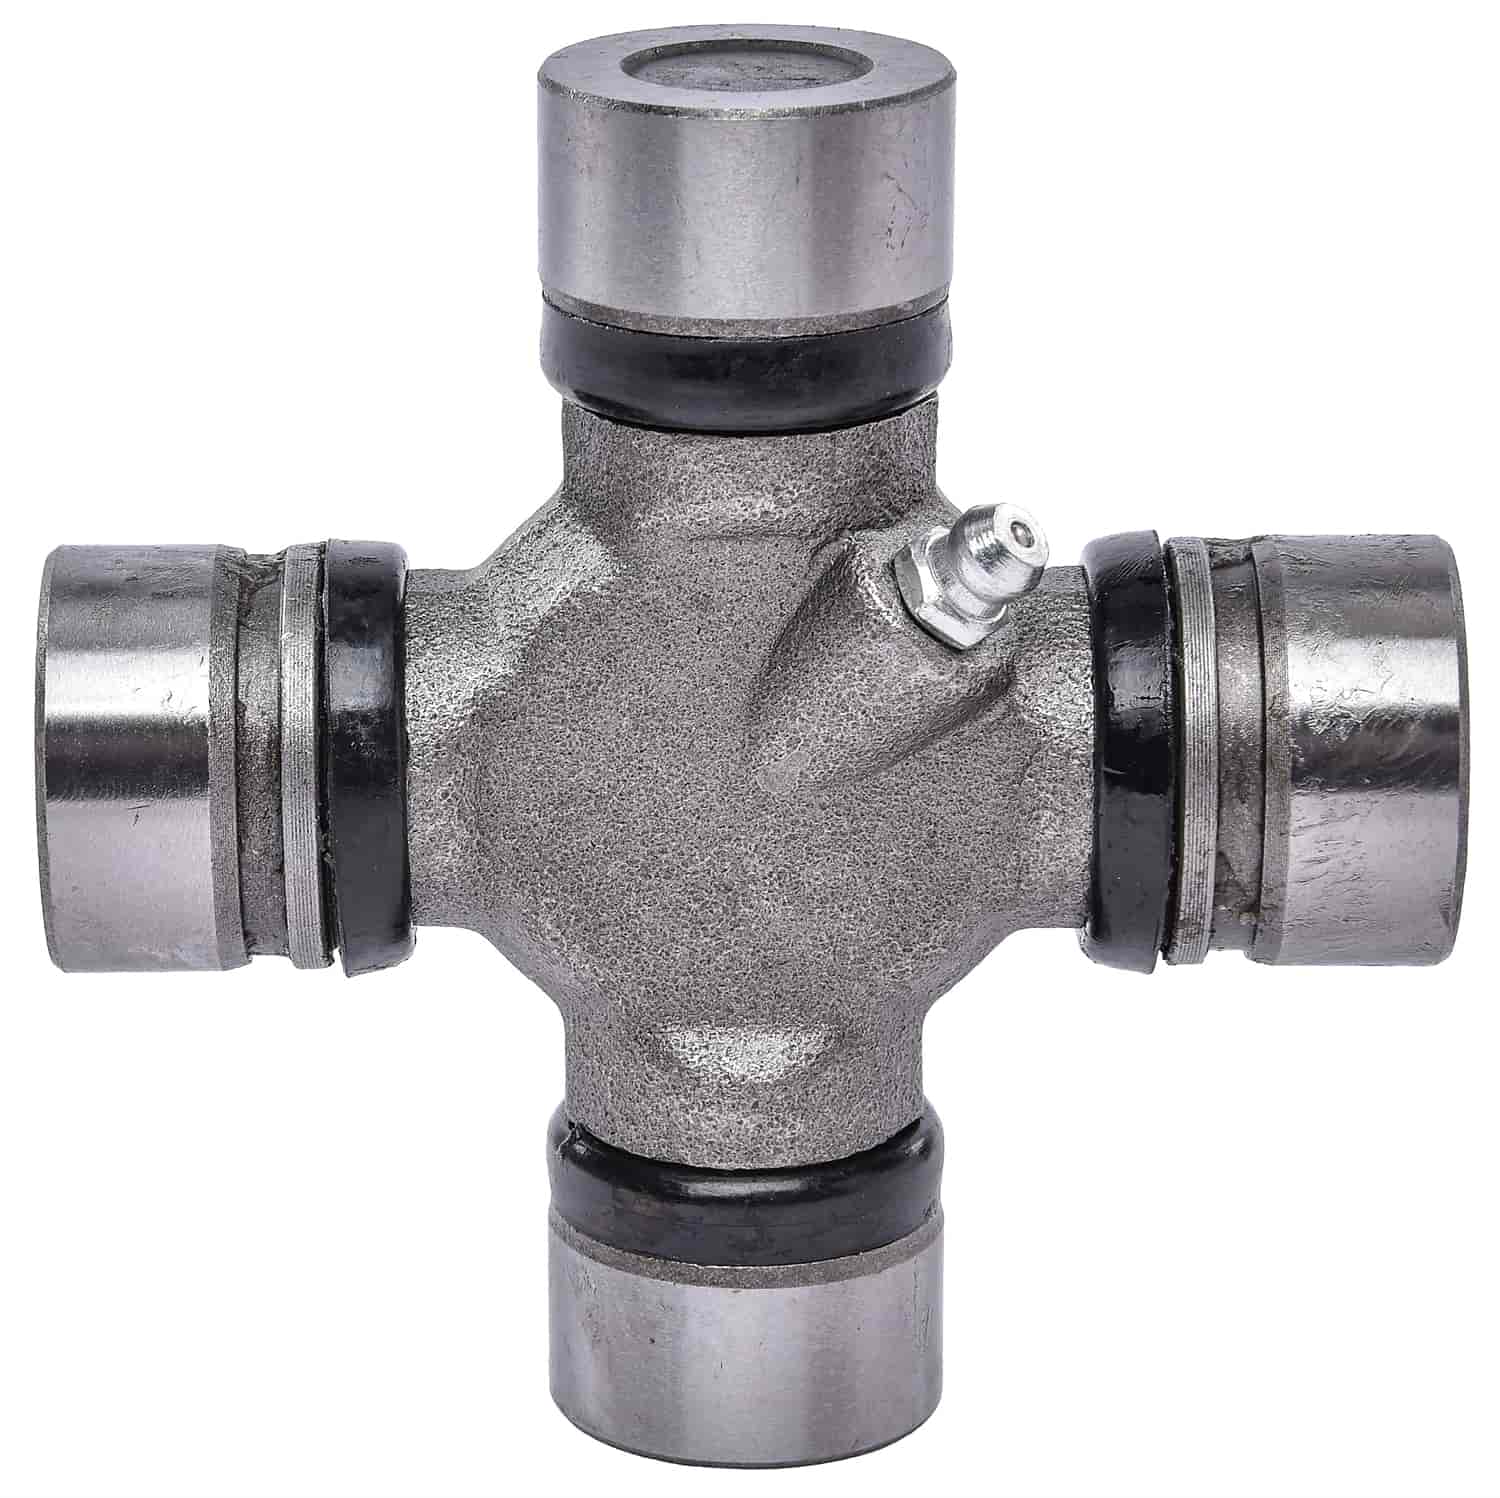 Greasable U-Joint 1330 to GM 3RL, S44, Mechanics 3, American Axle 1344 Conversion Series Combination